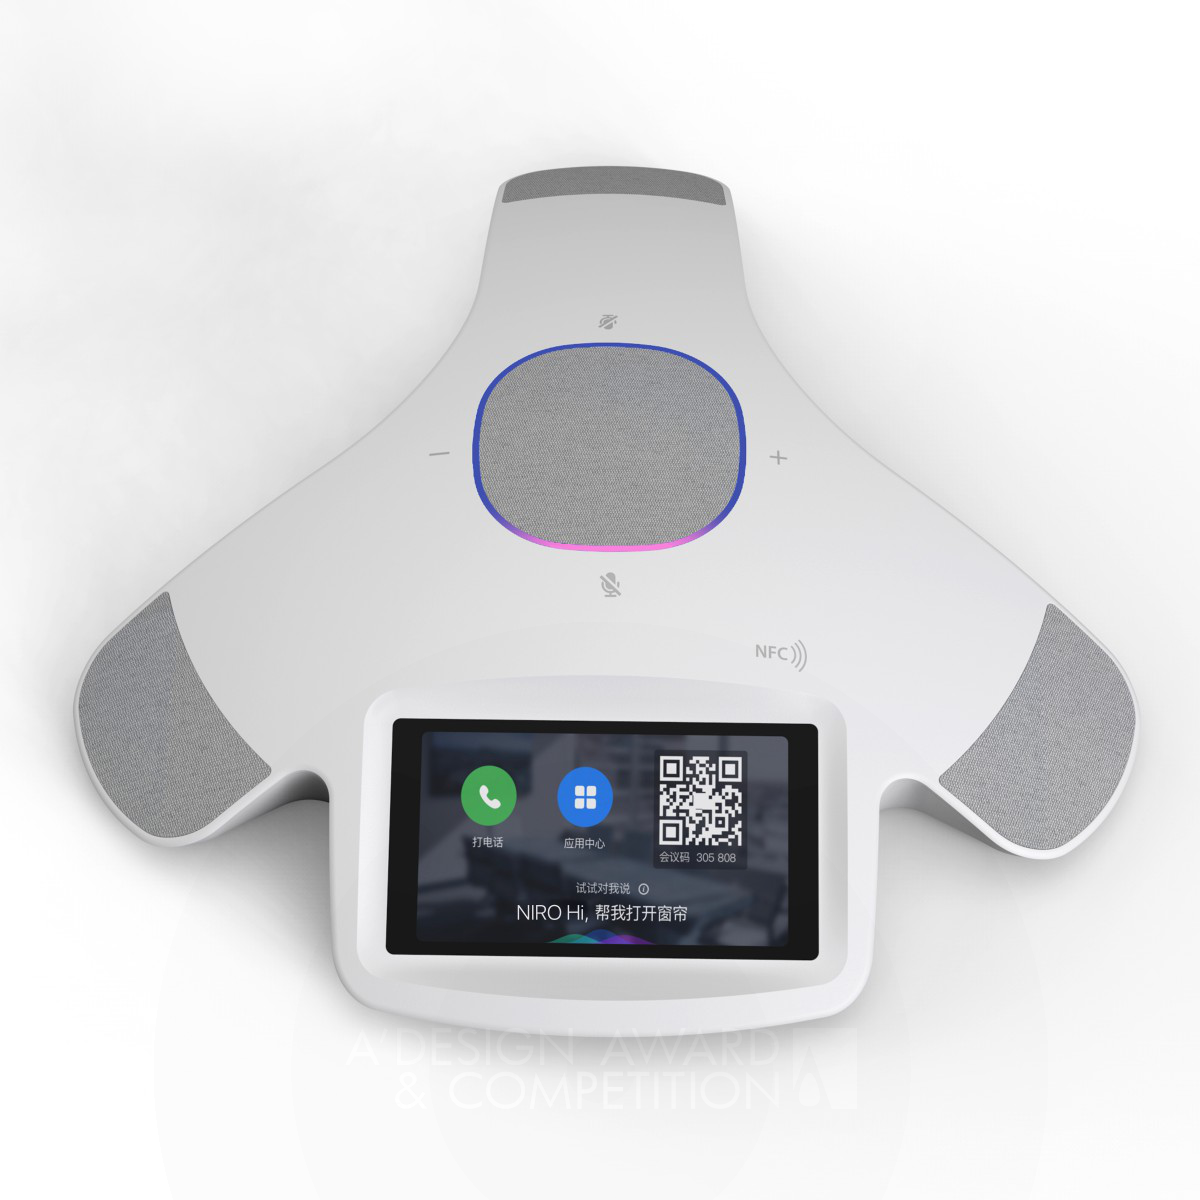 Hongtao Zhang Smart Assistant for Conference Room